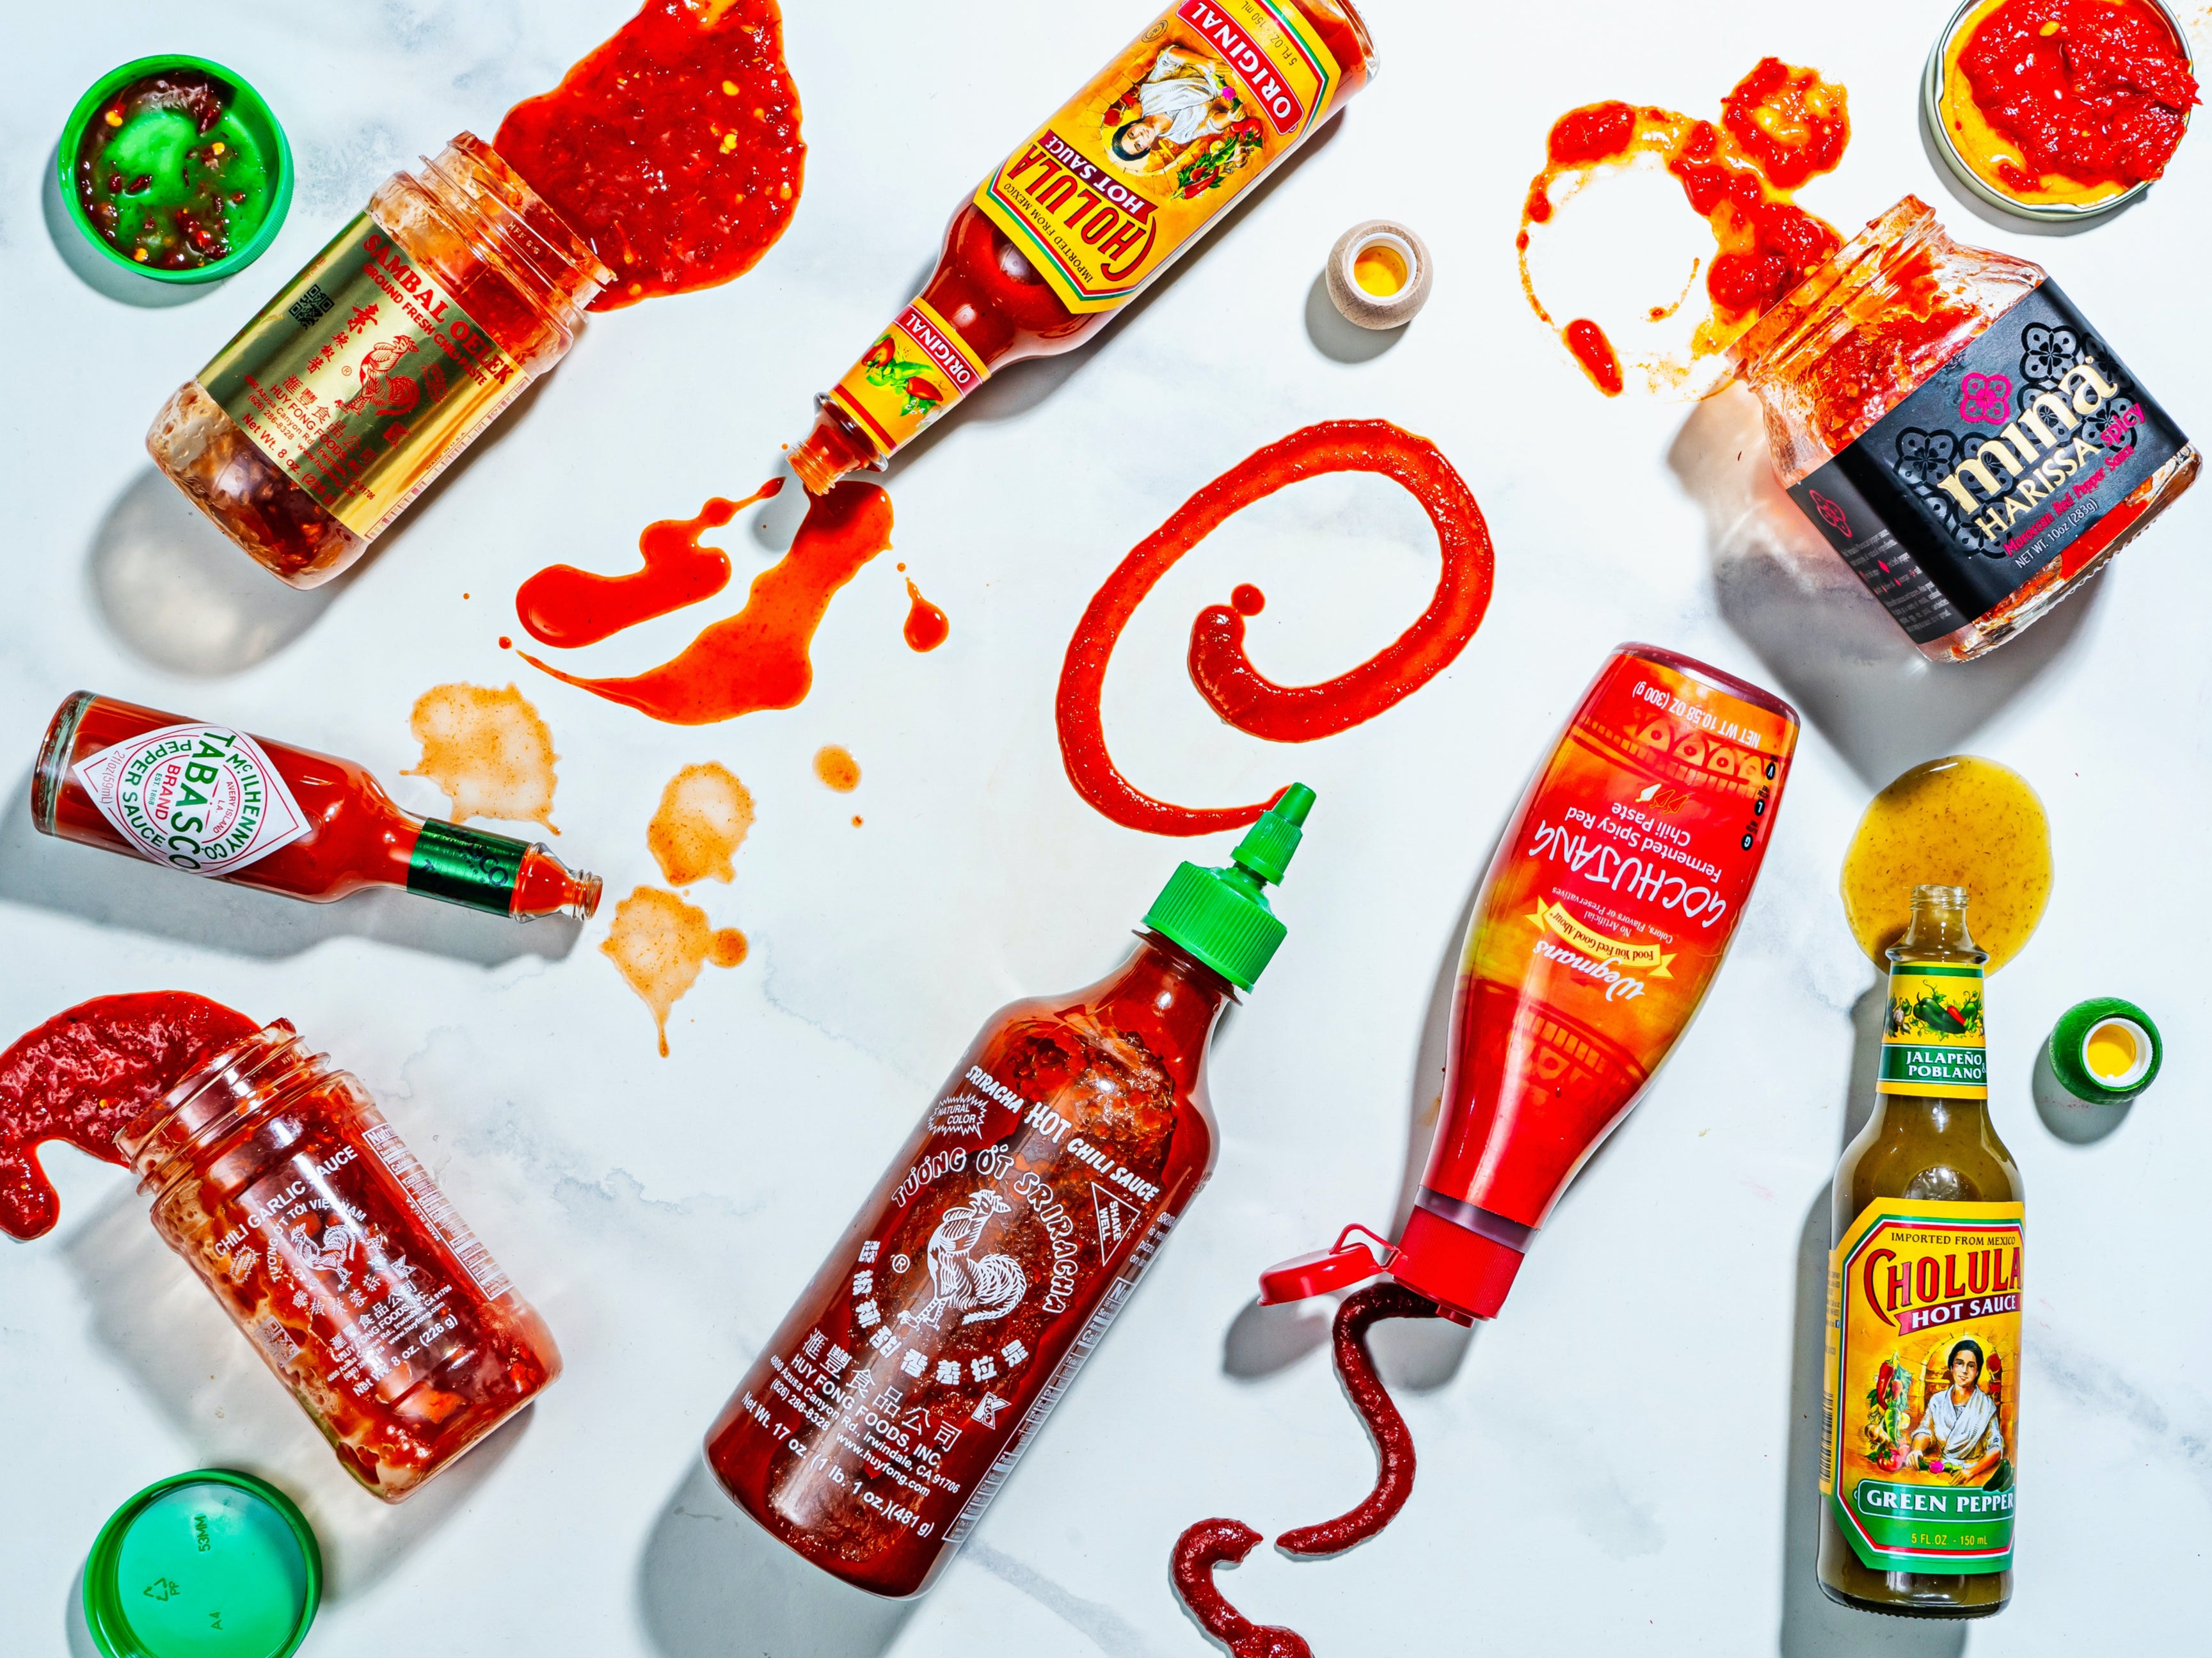 Our love for hot sauce has lasted millennia